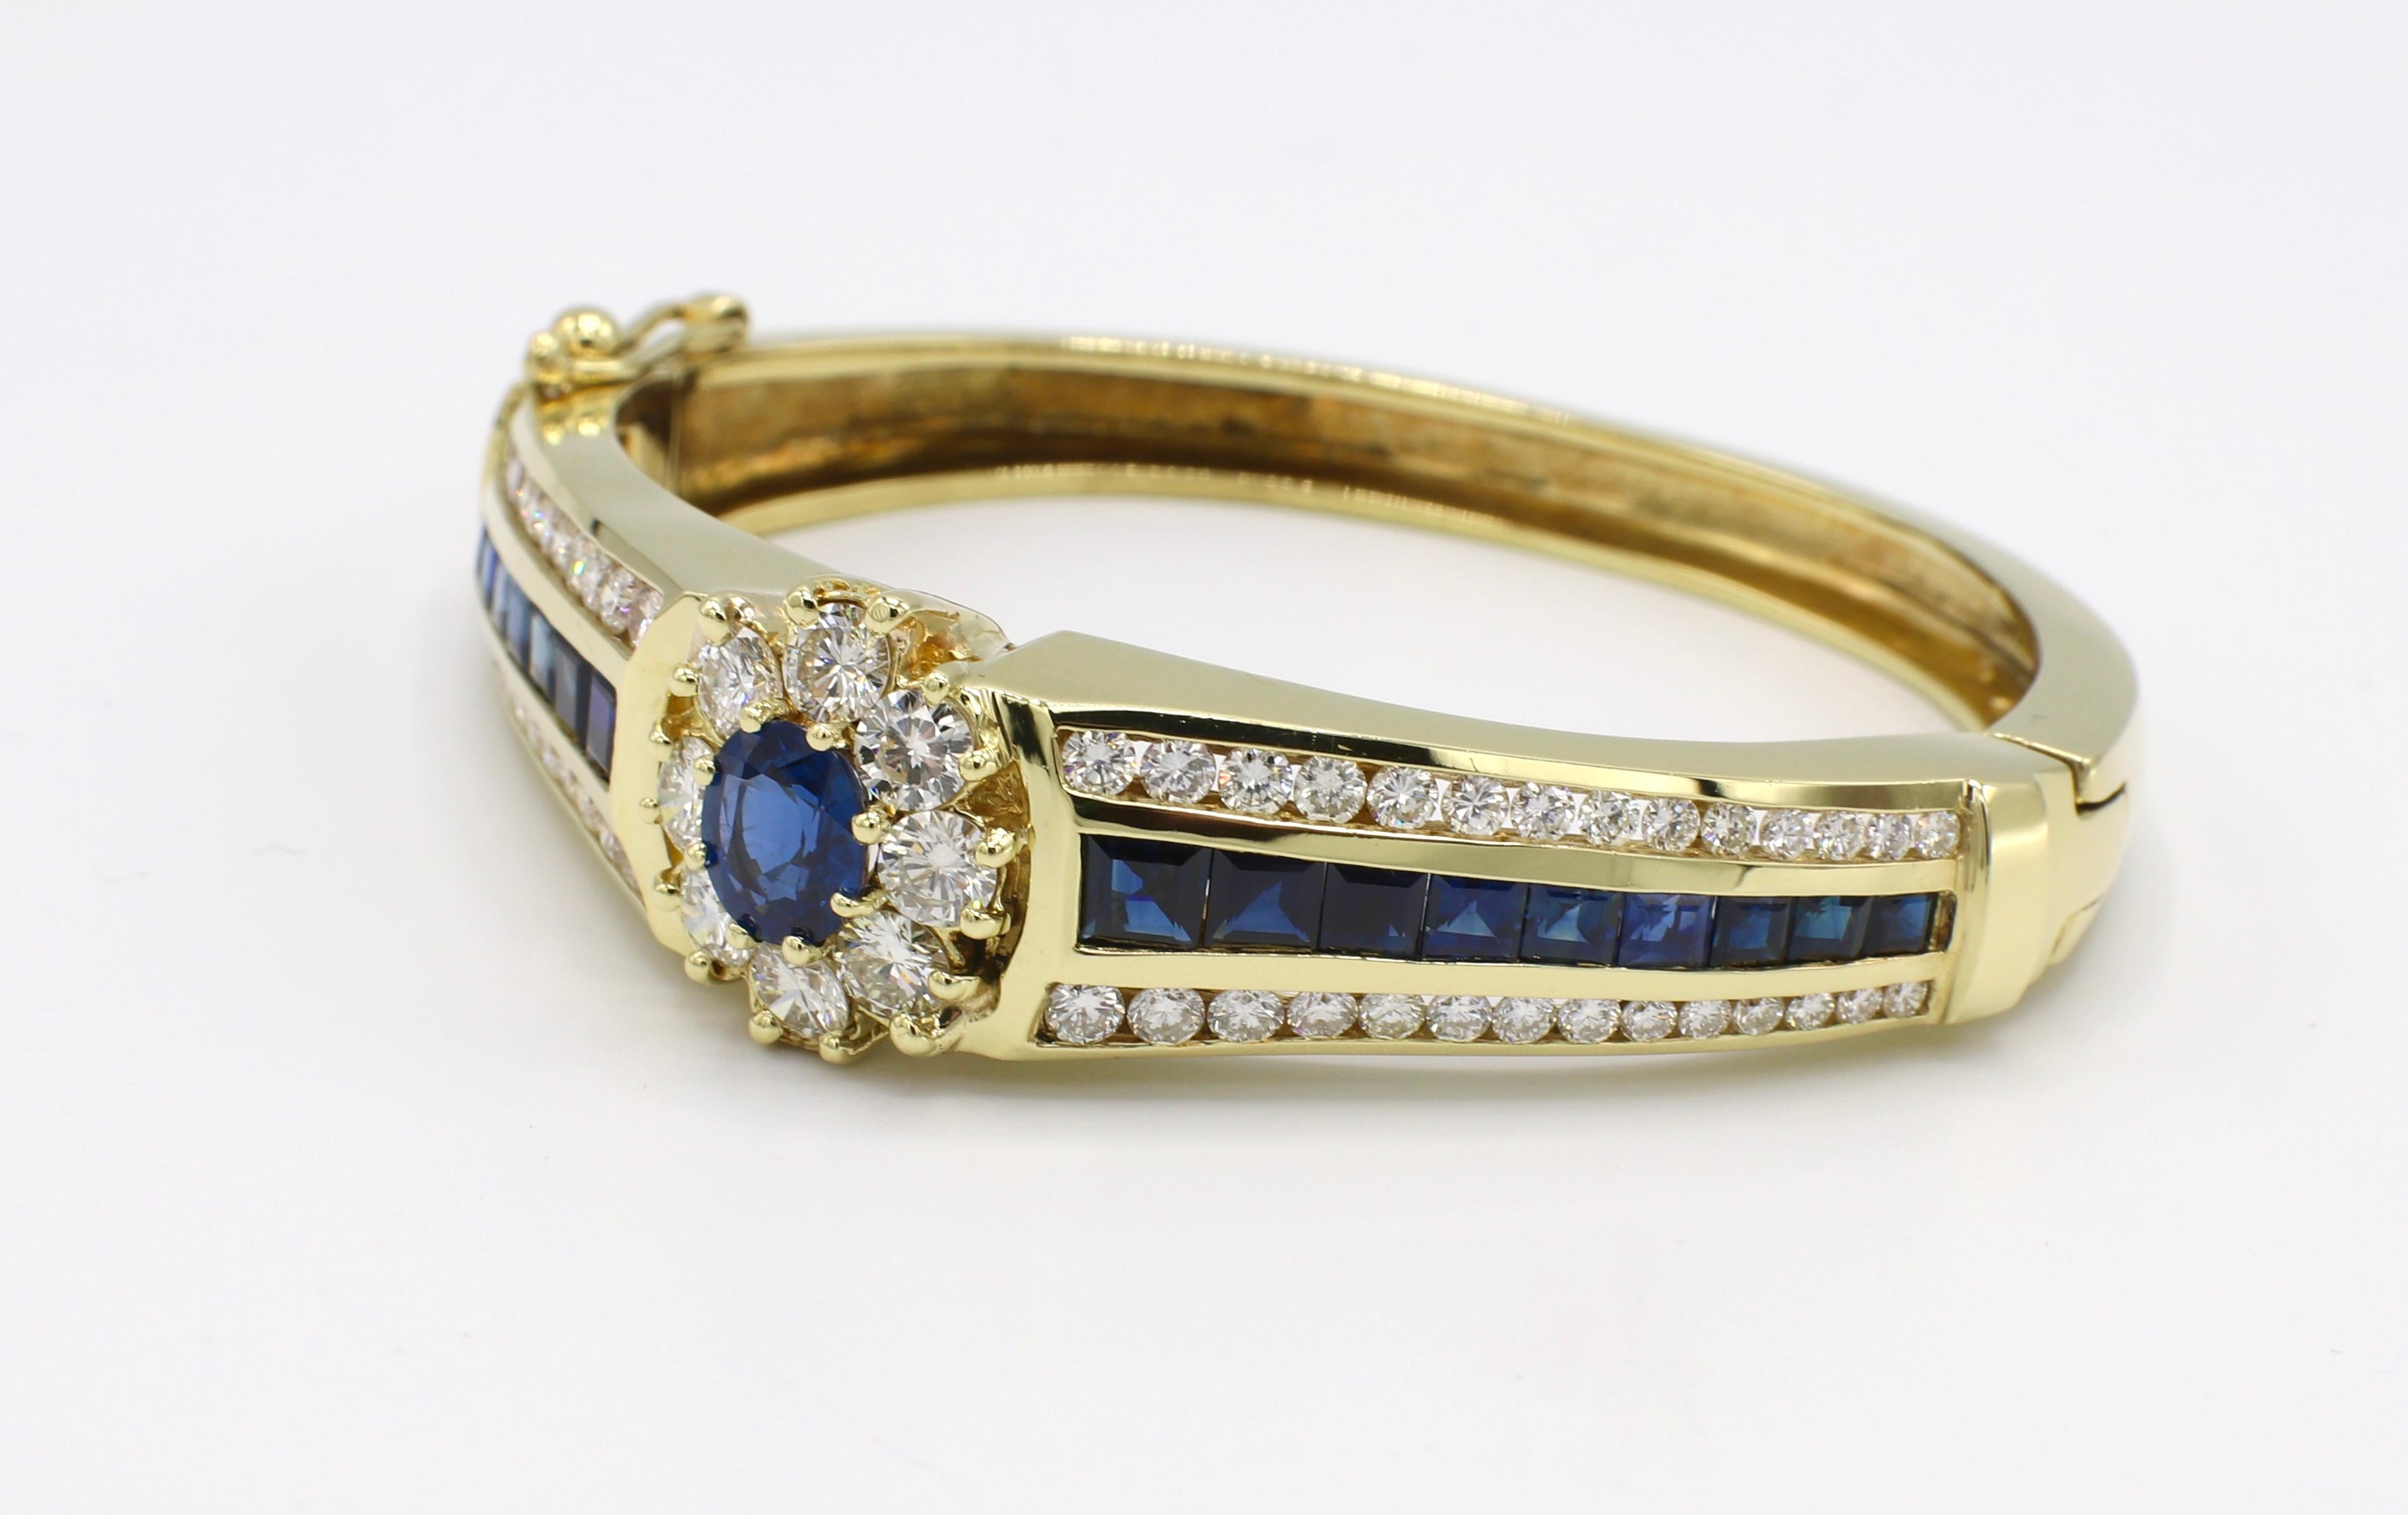 GIA Certified 18 Karat 6.5 Carat Diamond & Blue Sapphire Hinged Bangle Bracelet 
GIA report number: 2215398956 (please note original GIA report pictured for details) 
Metal: 18k yellow gold
Weight: 61.45 grams
Diamonds: Approx. 6.5 CTW G VS round